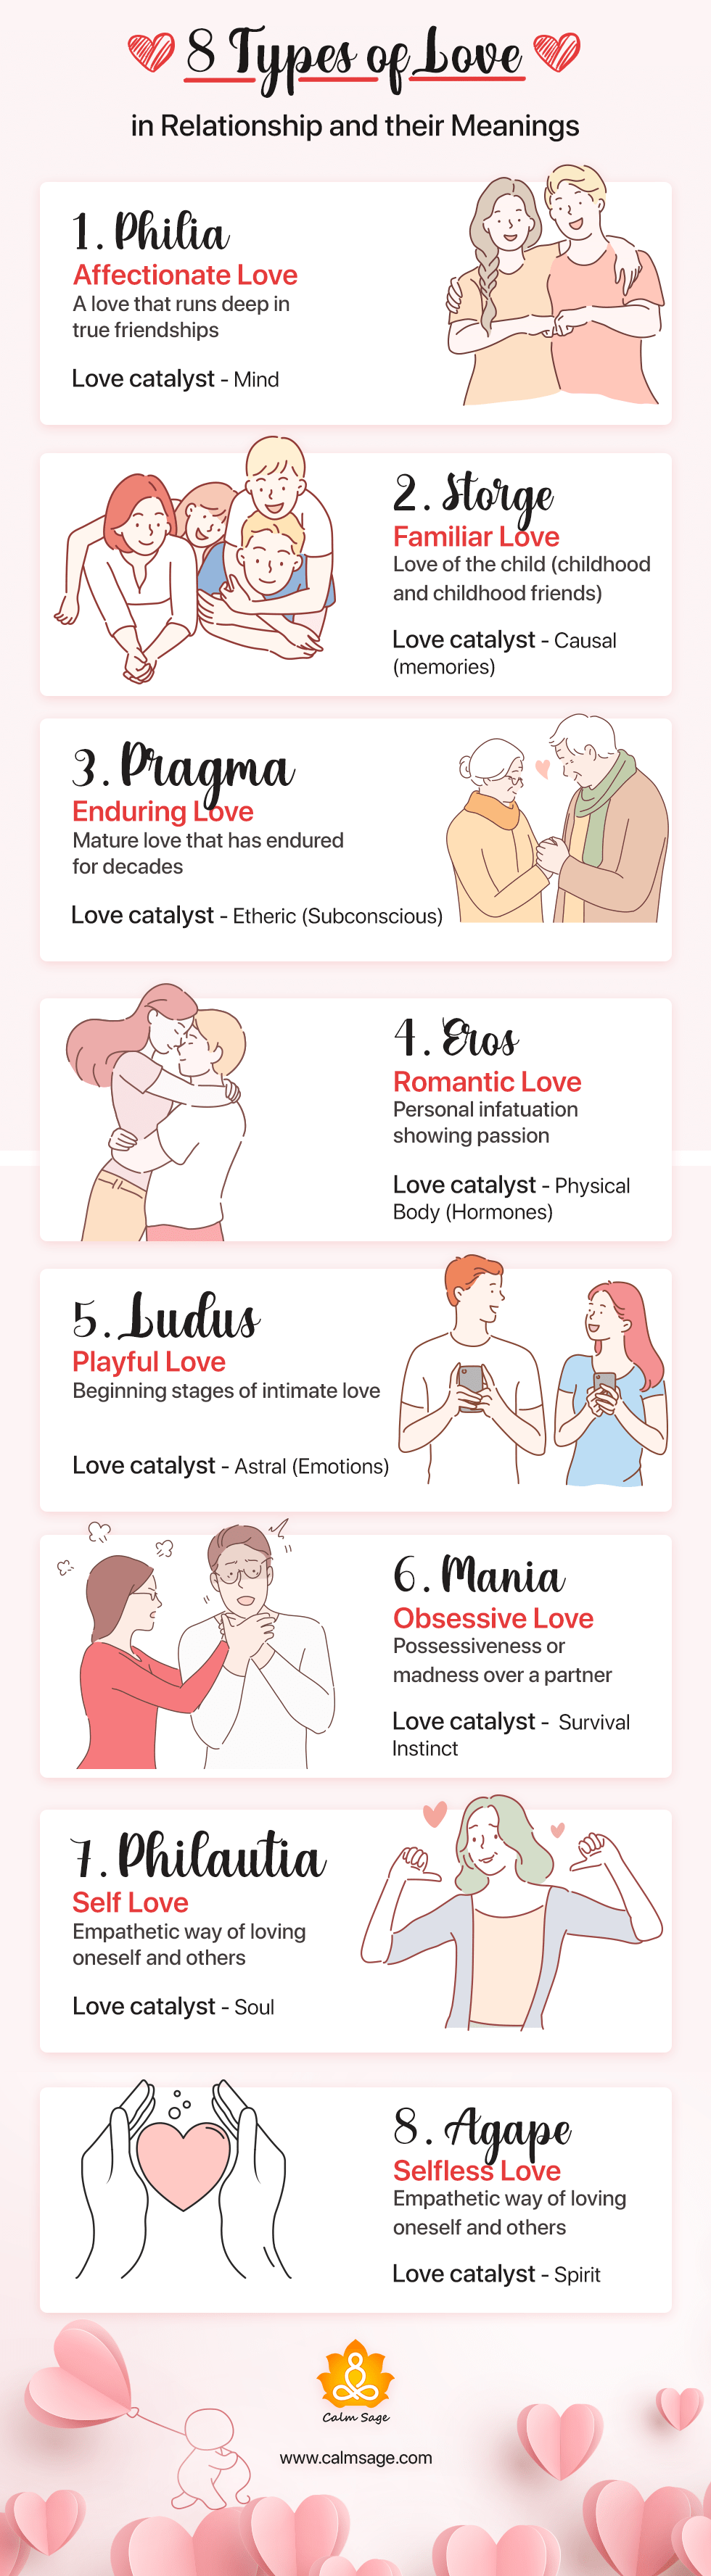 8 Types of Love